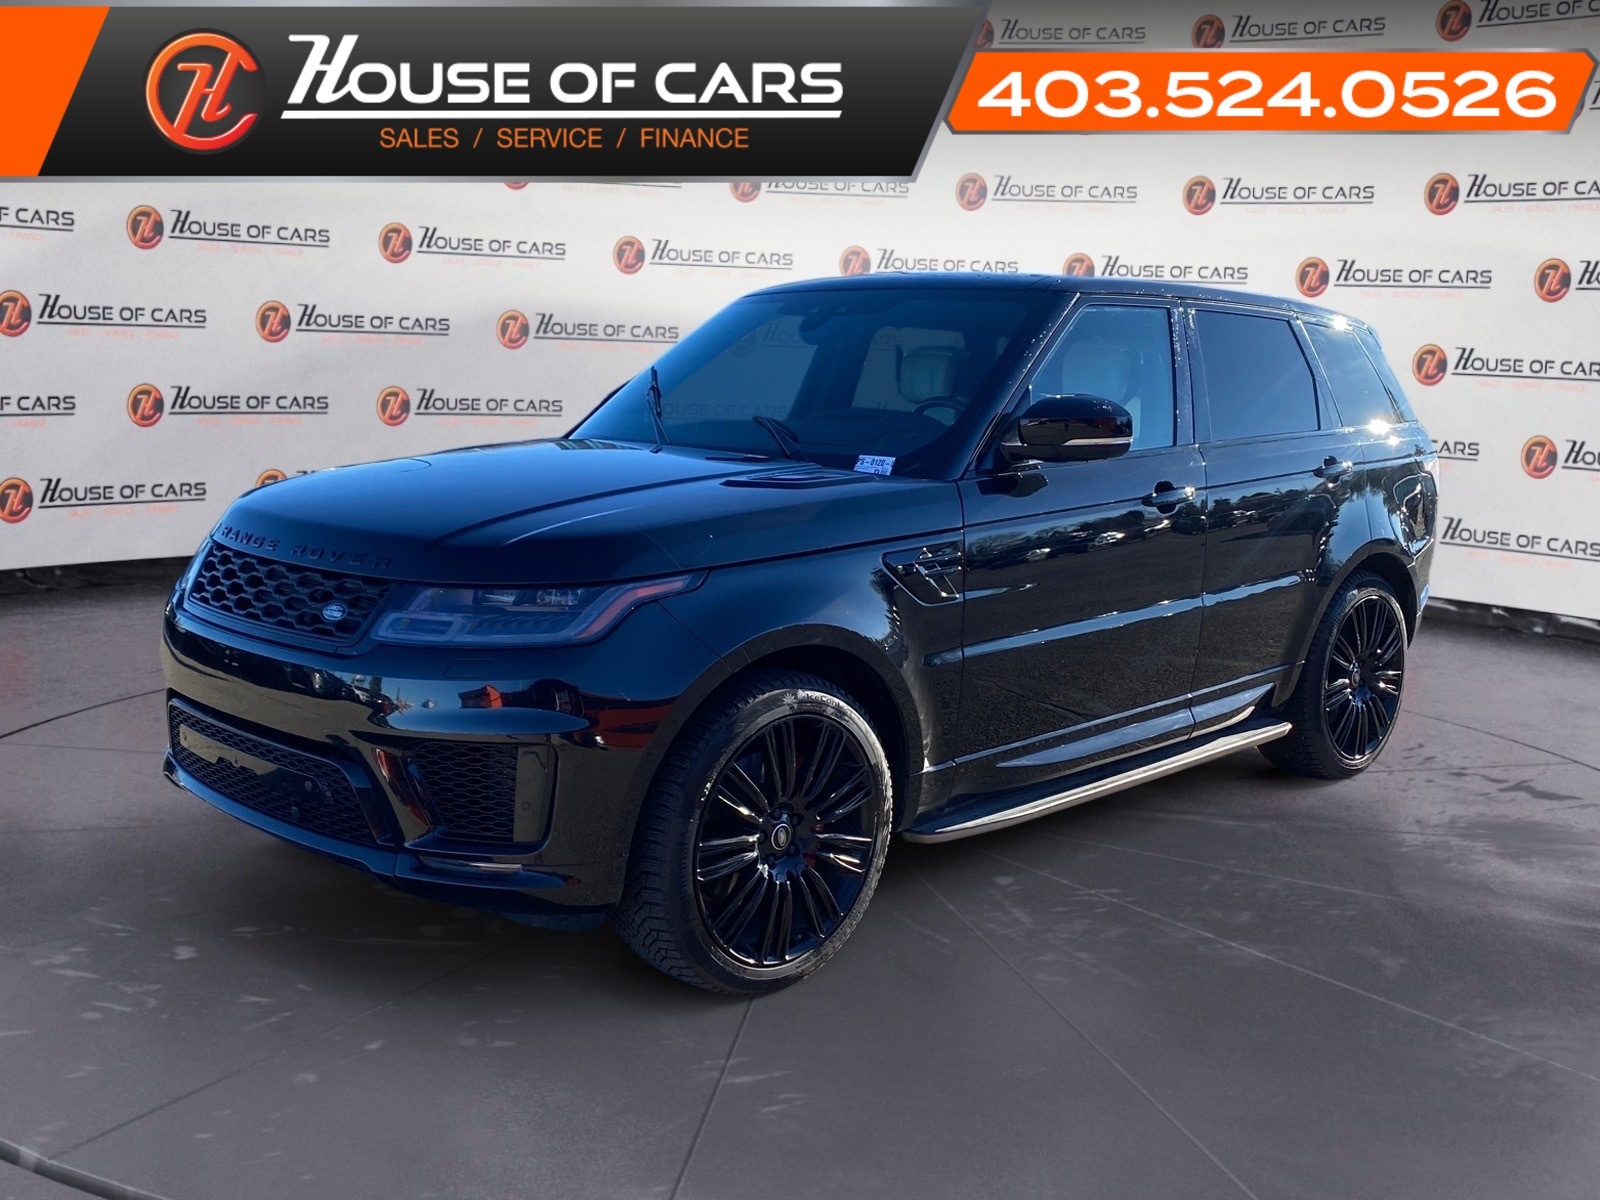 2019 Land Rover Range Rover Sport V8 Supercharged Autobiography Dynamic